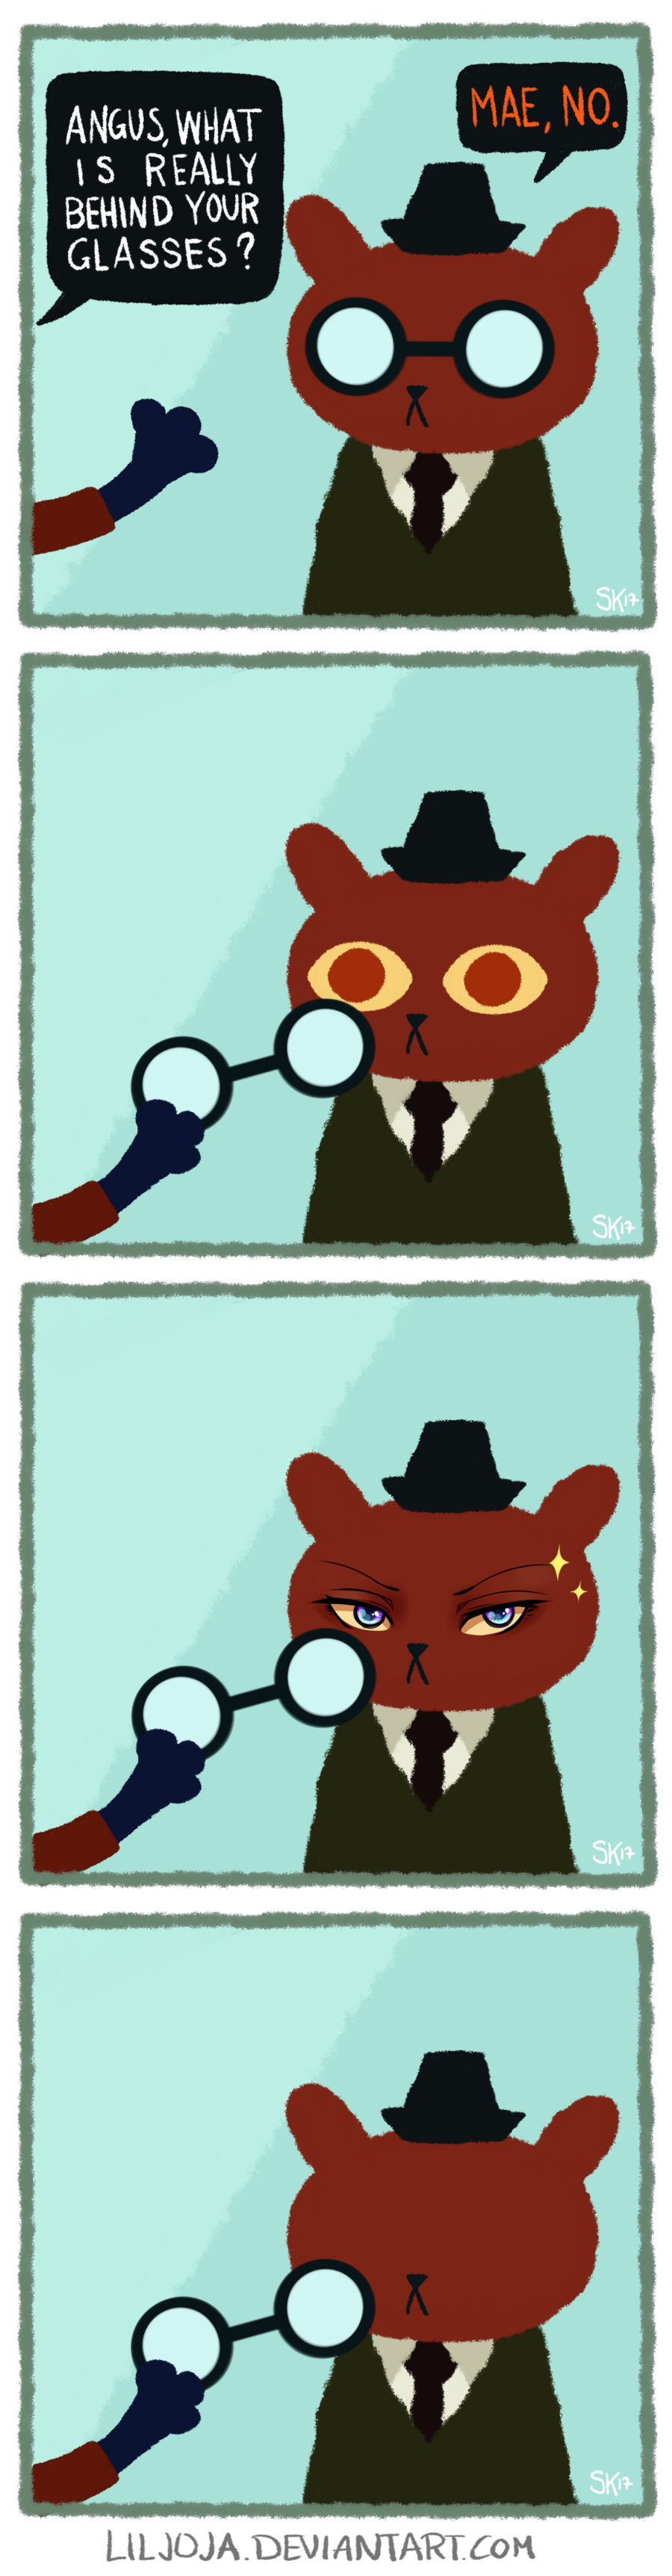 2017 angus_(nitw) angus_eyes anime anthro bear cat clothed clothing comic dialogue english_text eye_reveal eyeless eyewear fedora feline fully_clothed glasses hat holding_object humor invalid_tag liljoja_(artist) mae_(nitw) mammal necktie night_in_the_woods nightmare_eyes parody paws reveal shirt sparkle speech_bubble sweater text twinkle video_games